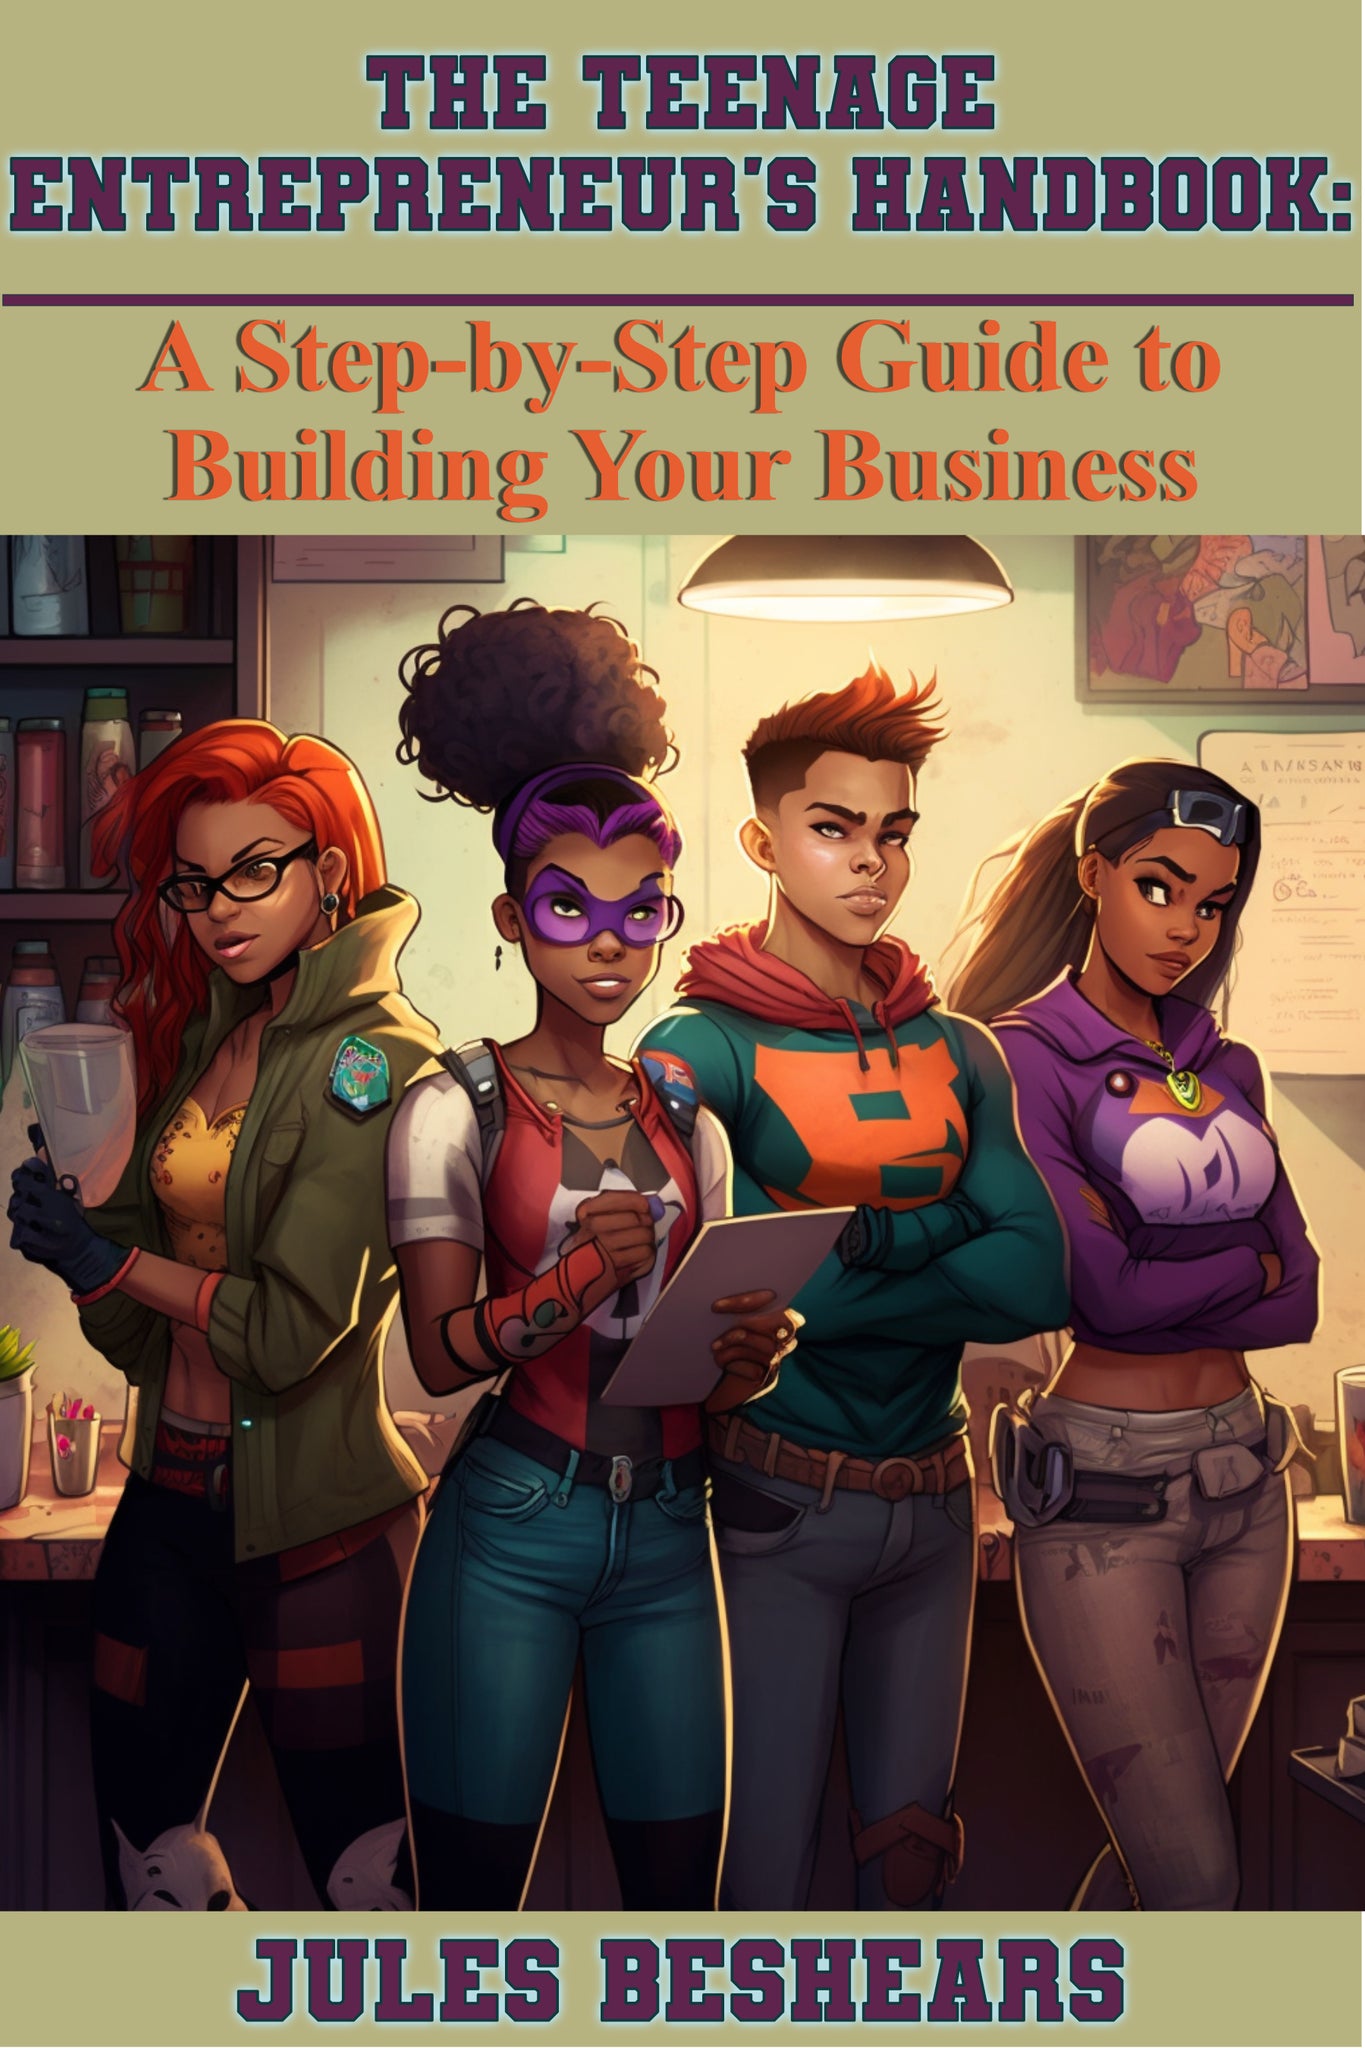 The Teen Entrepreneur's Handbook: A Step-by-Step Guide to Building Your Business